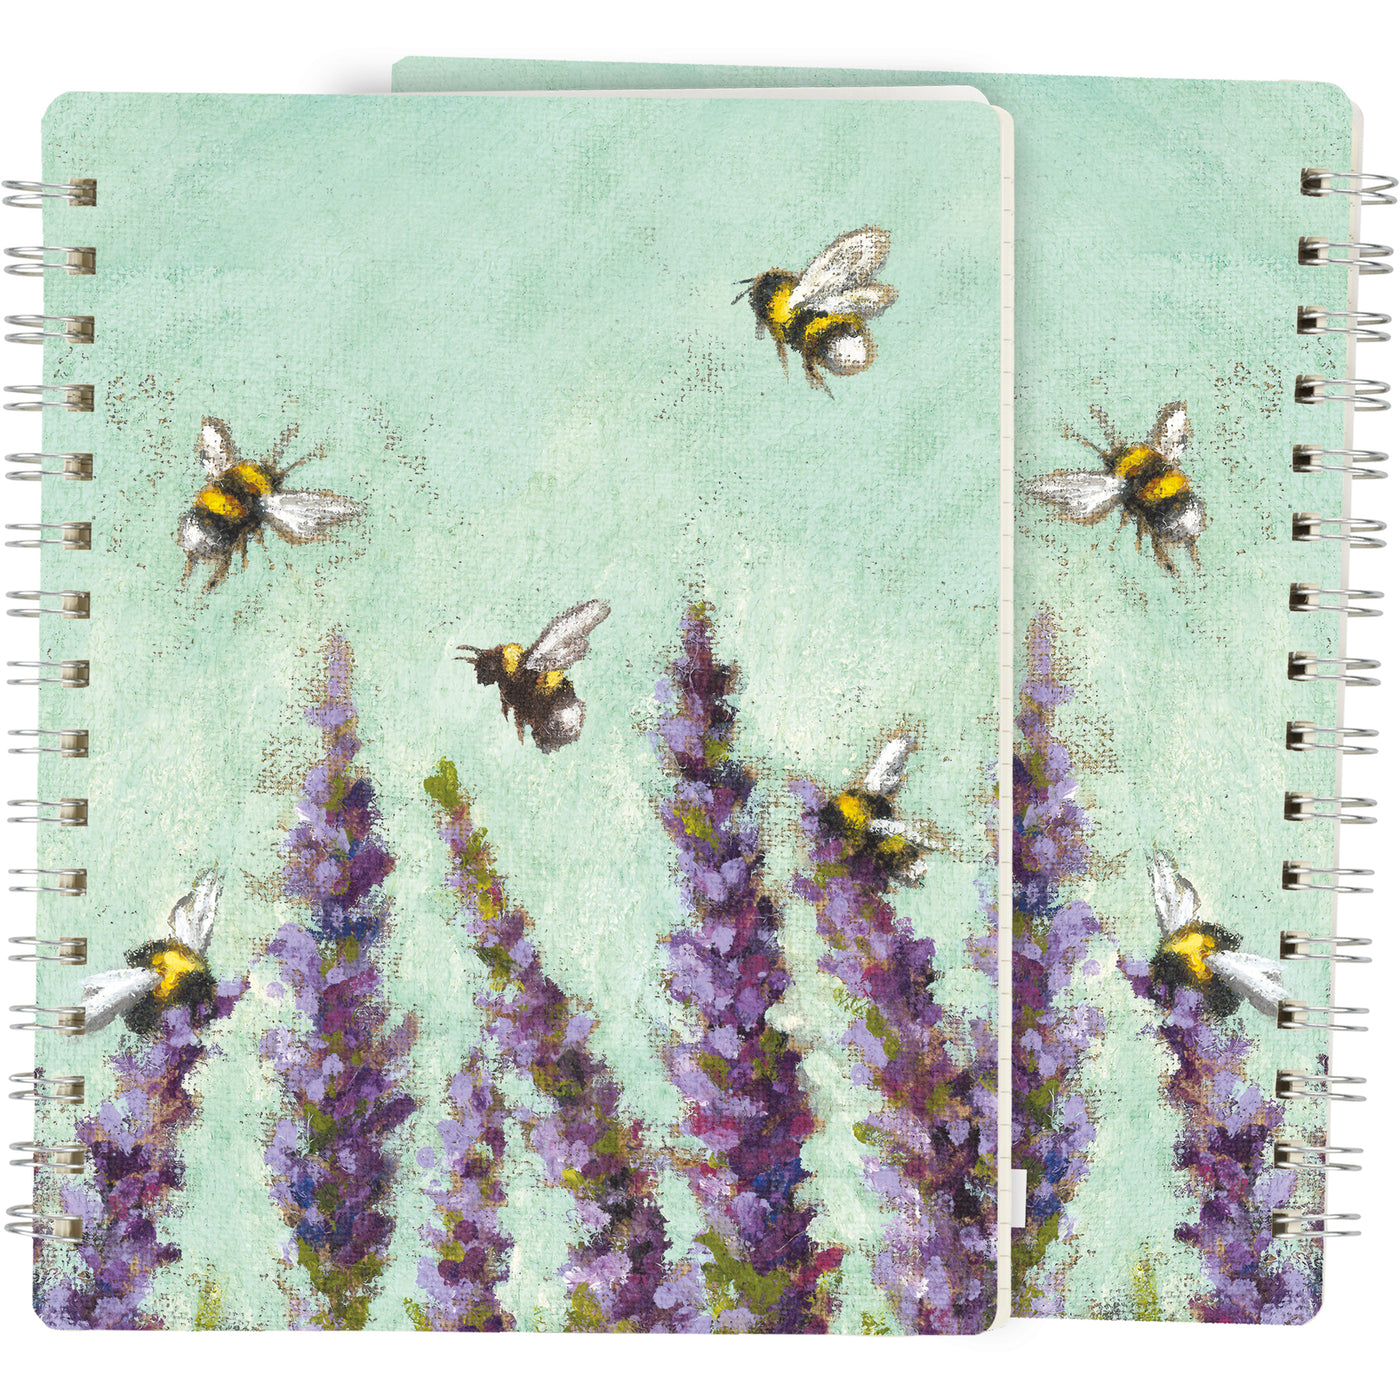 Lavender and Bees Spiral Journal Notebook